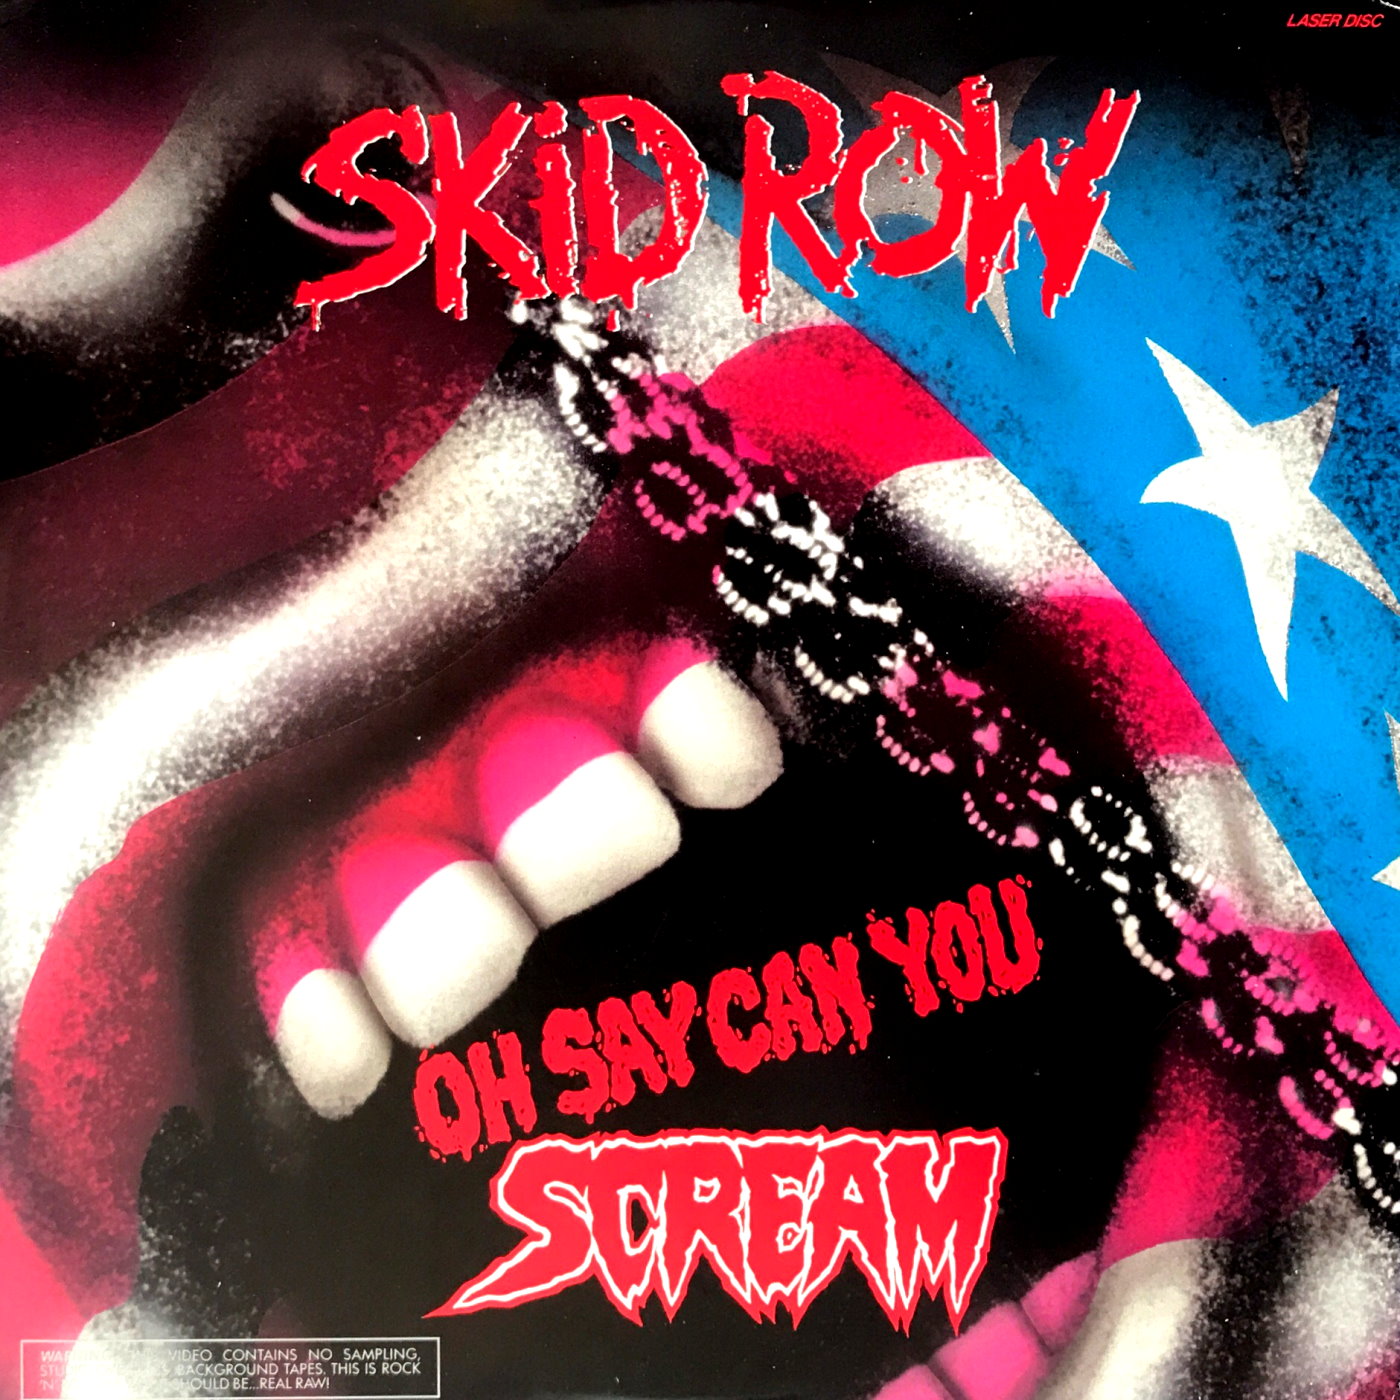 Cover - Skid Row - Oh Say Can You Scream.jpg